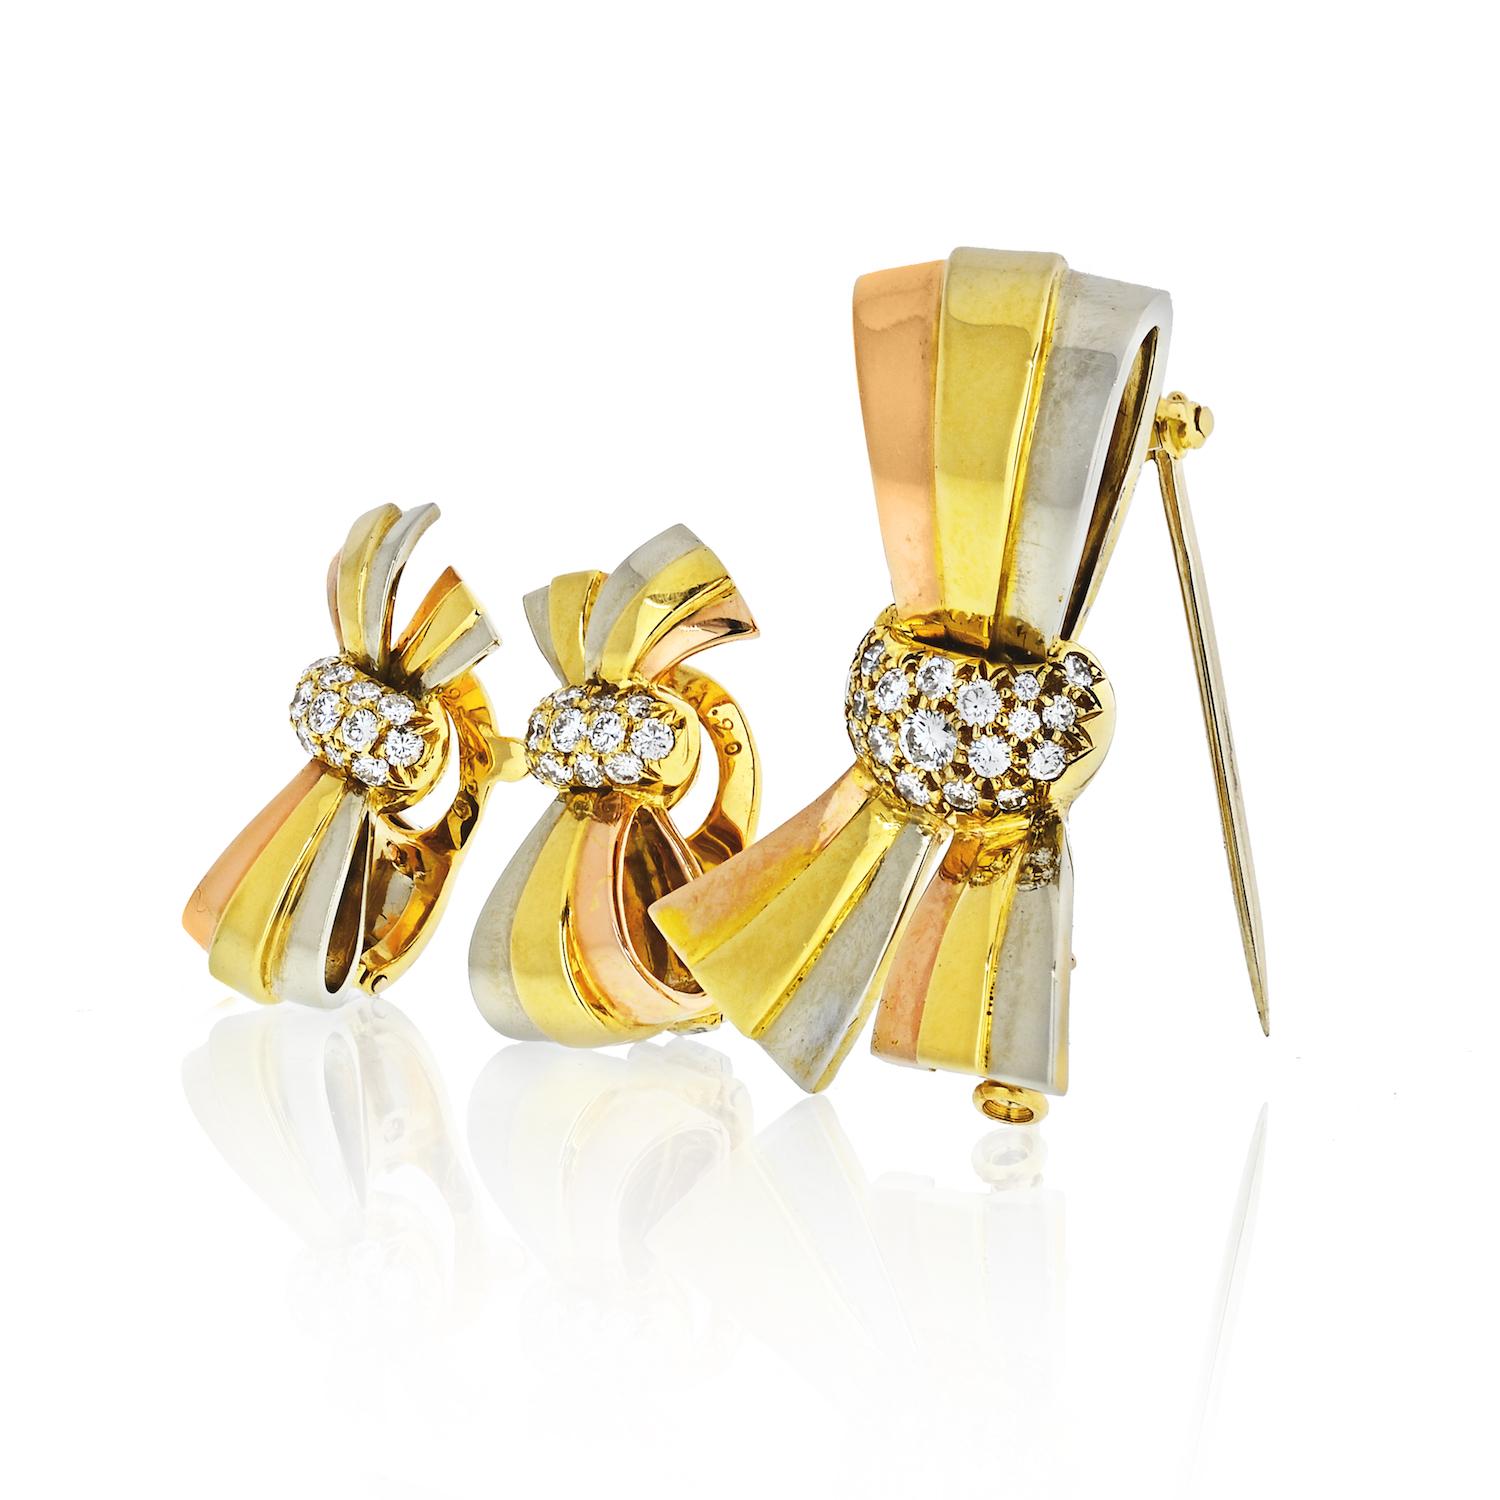 Gold set of bow earrings and a brooch, in 18k tri color gold, by Van Cleef & Arpels, adorned with approx. 0.55ctw in diamonds total. Earrings measure 23mm x 12mm, brooch - 35mm x 24mm. Marked: VCA, 750, or, 83, French marks. Weight - 22.5